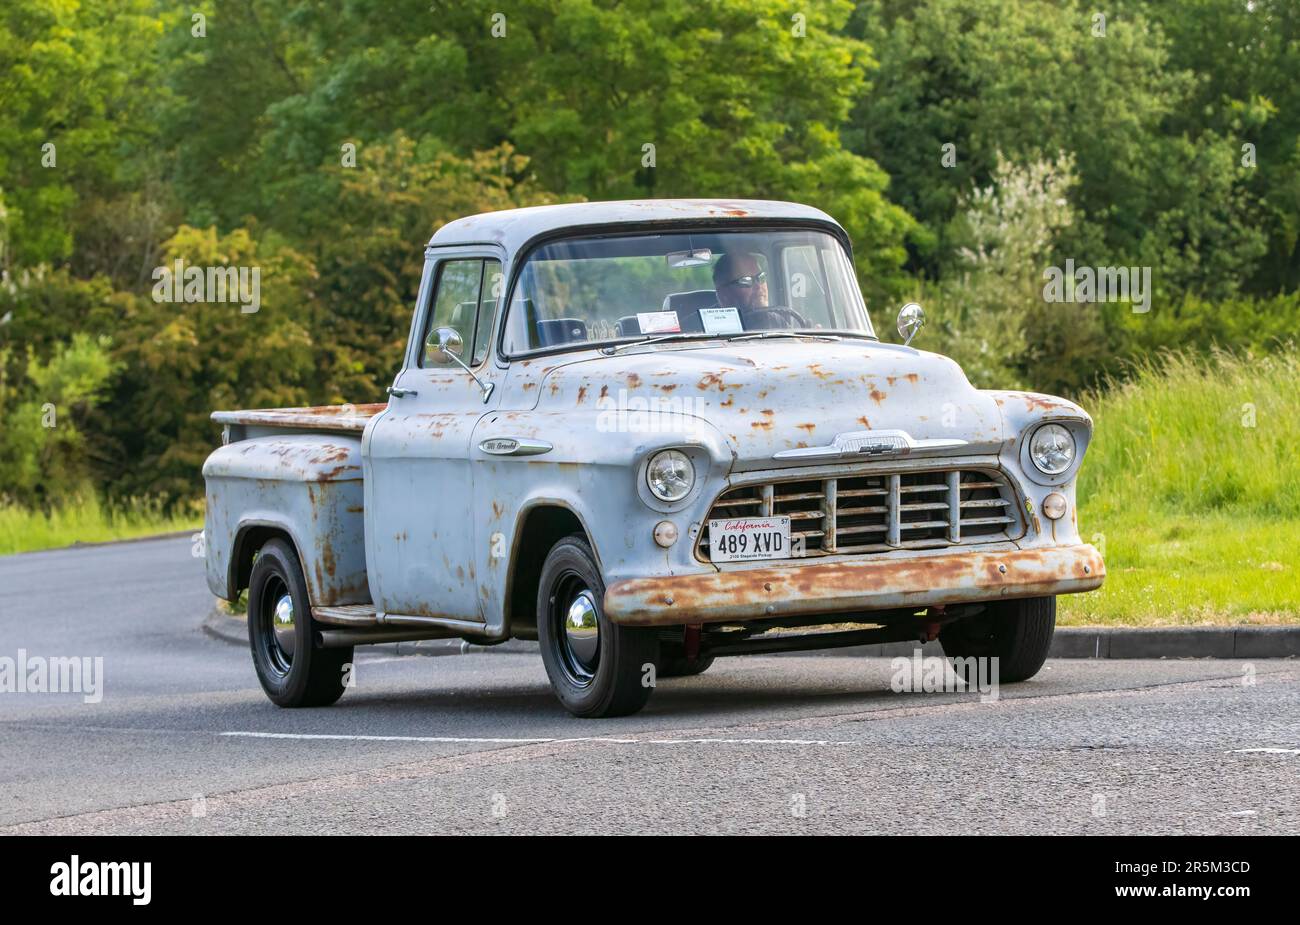 Stony Stratford,UK - June 4th 2023: 1957 old CHEVROLET pick up travelling on an English country road. Stock Photo